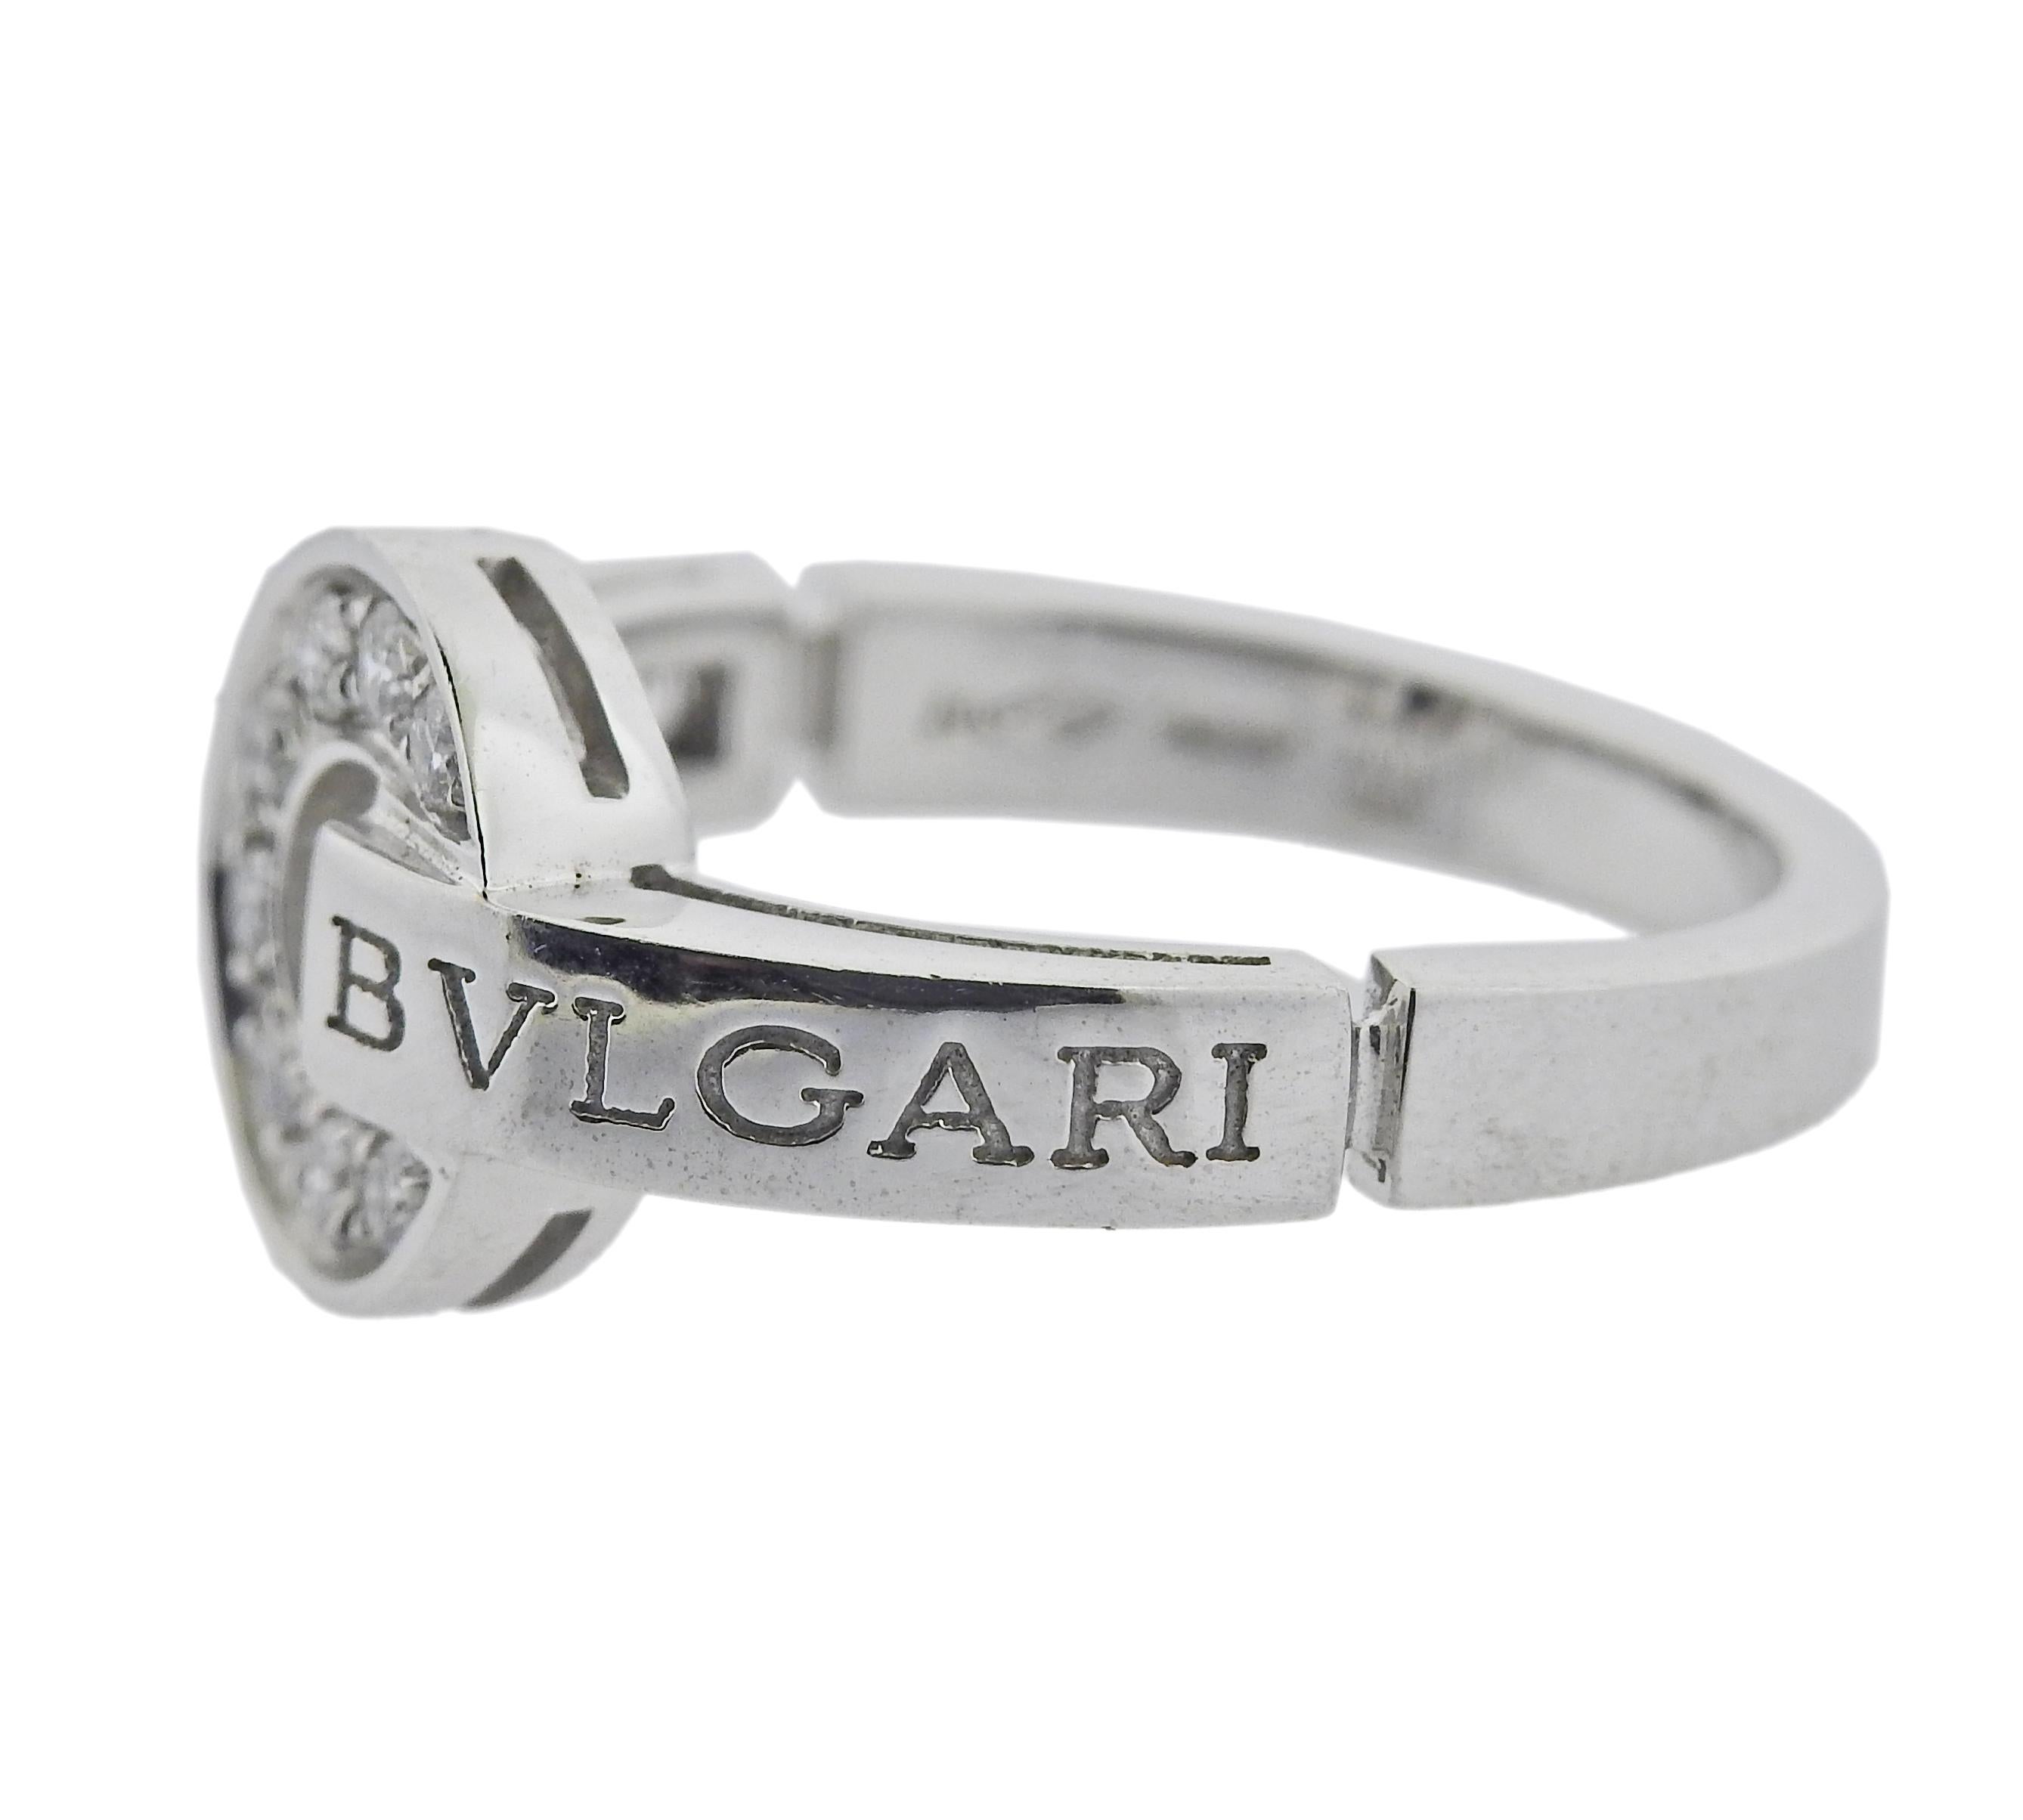 18k white gold Bvlgari ring with 0.28ctw G/VS diamonds. Retail $4600. Comes with COA and box. Ring size 7, top is 11mm in diameter. Marked Bvlgari, made in Italy, Italian mark, 750, Serial number. Weight 6.4 grams